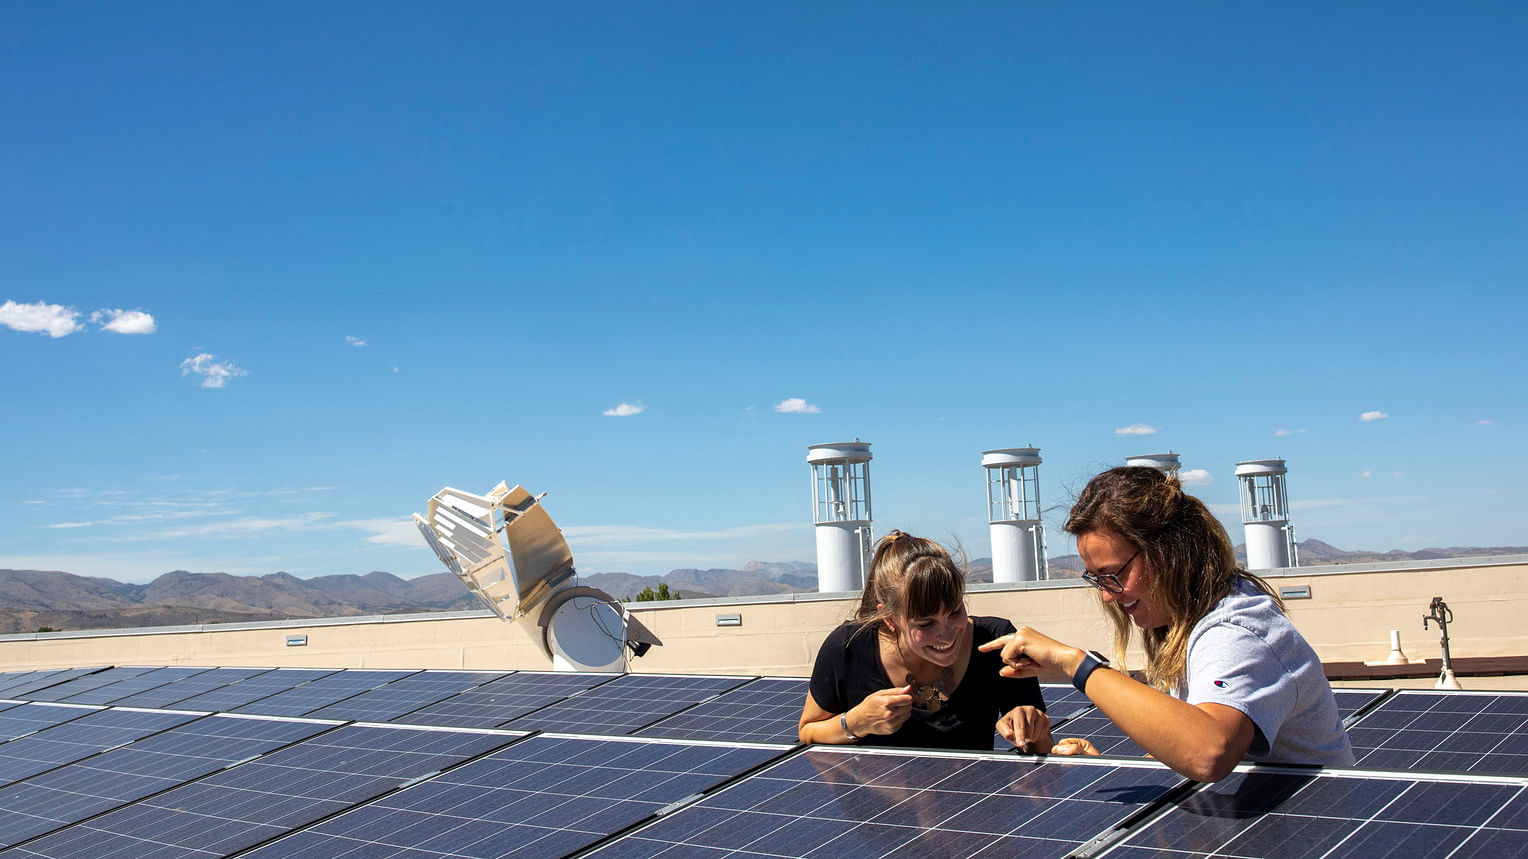 Students at the University of Colorado inspect a solar panel. Scientists say that we will need to find alternate material to construct panels in the future, and that we must also introduce a robust recycling method to salvage valuable materials from panels which reach the end of their life. Courtesy: US State Department